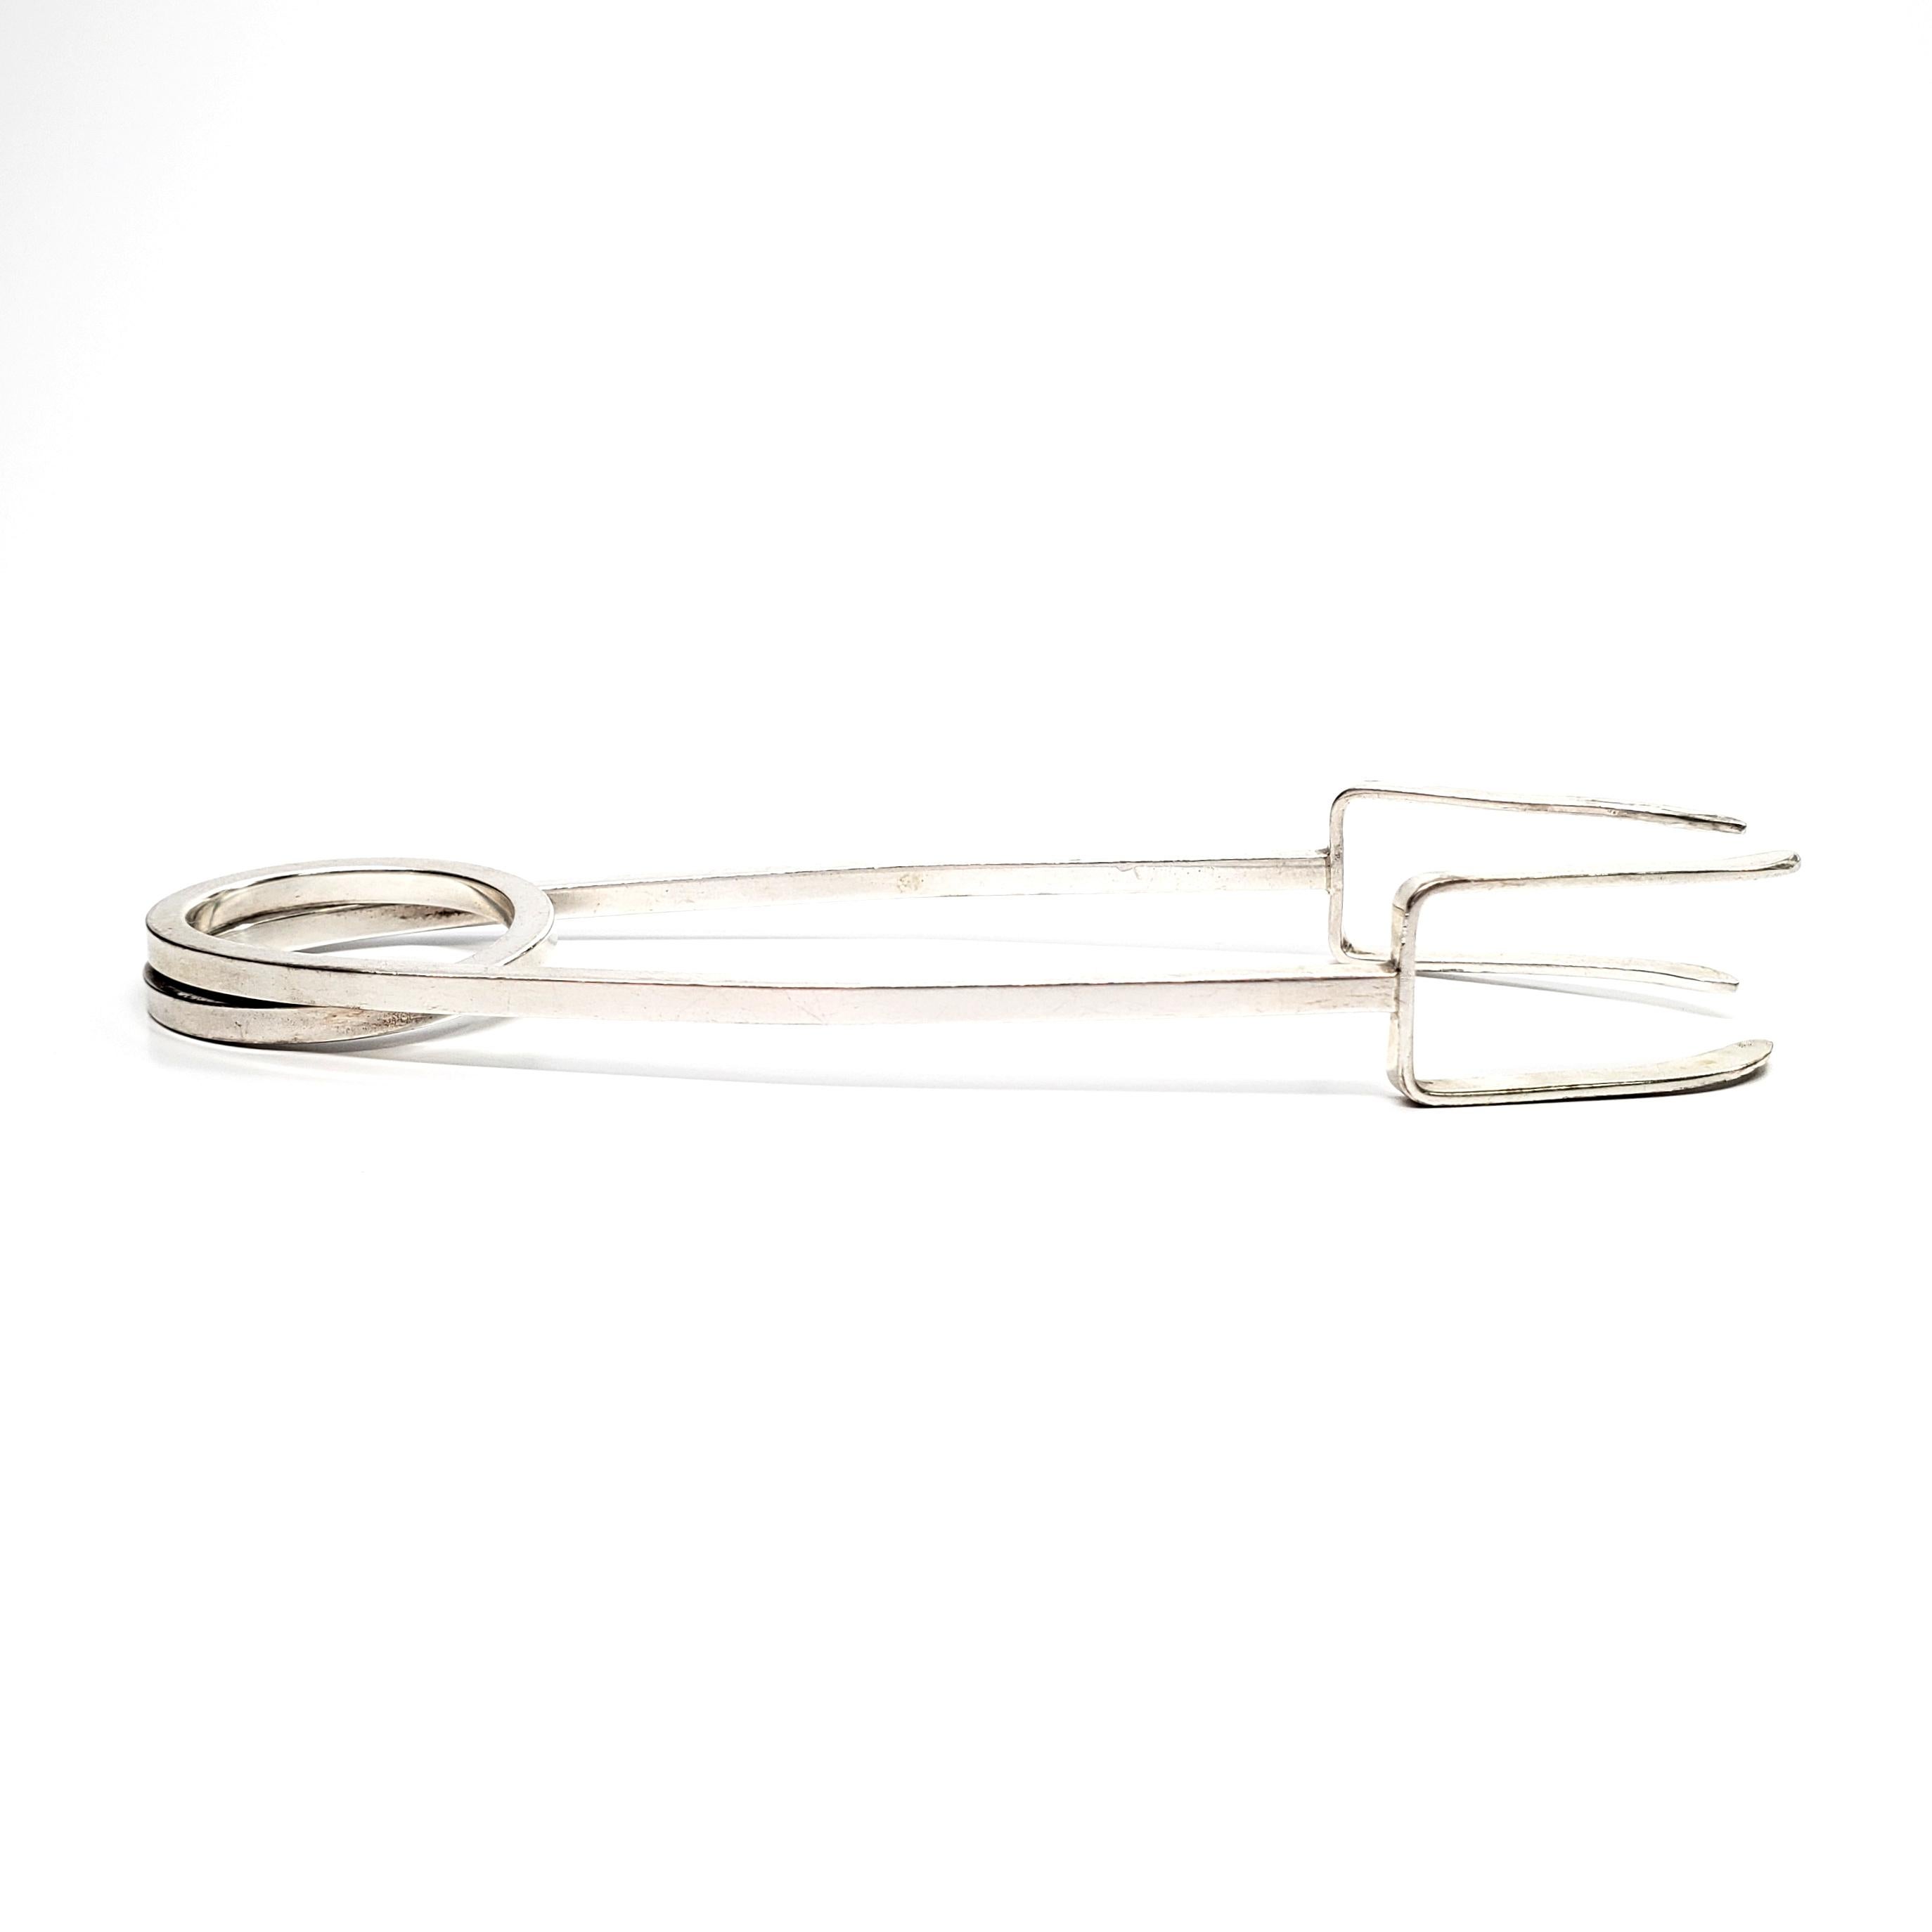 Vintage sterling silver ice tongs designed by Leonore Doskow for Tiffany & Co, circa 1950s.

The modernist design of these tongs feature a continuous rod twisted into a spring. Leonore Doskow designed many silver novelties for upscale